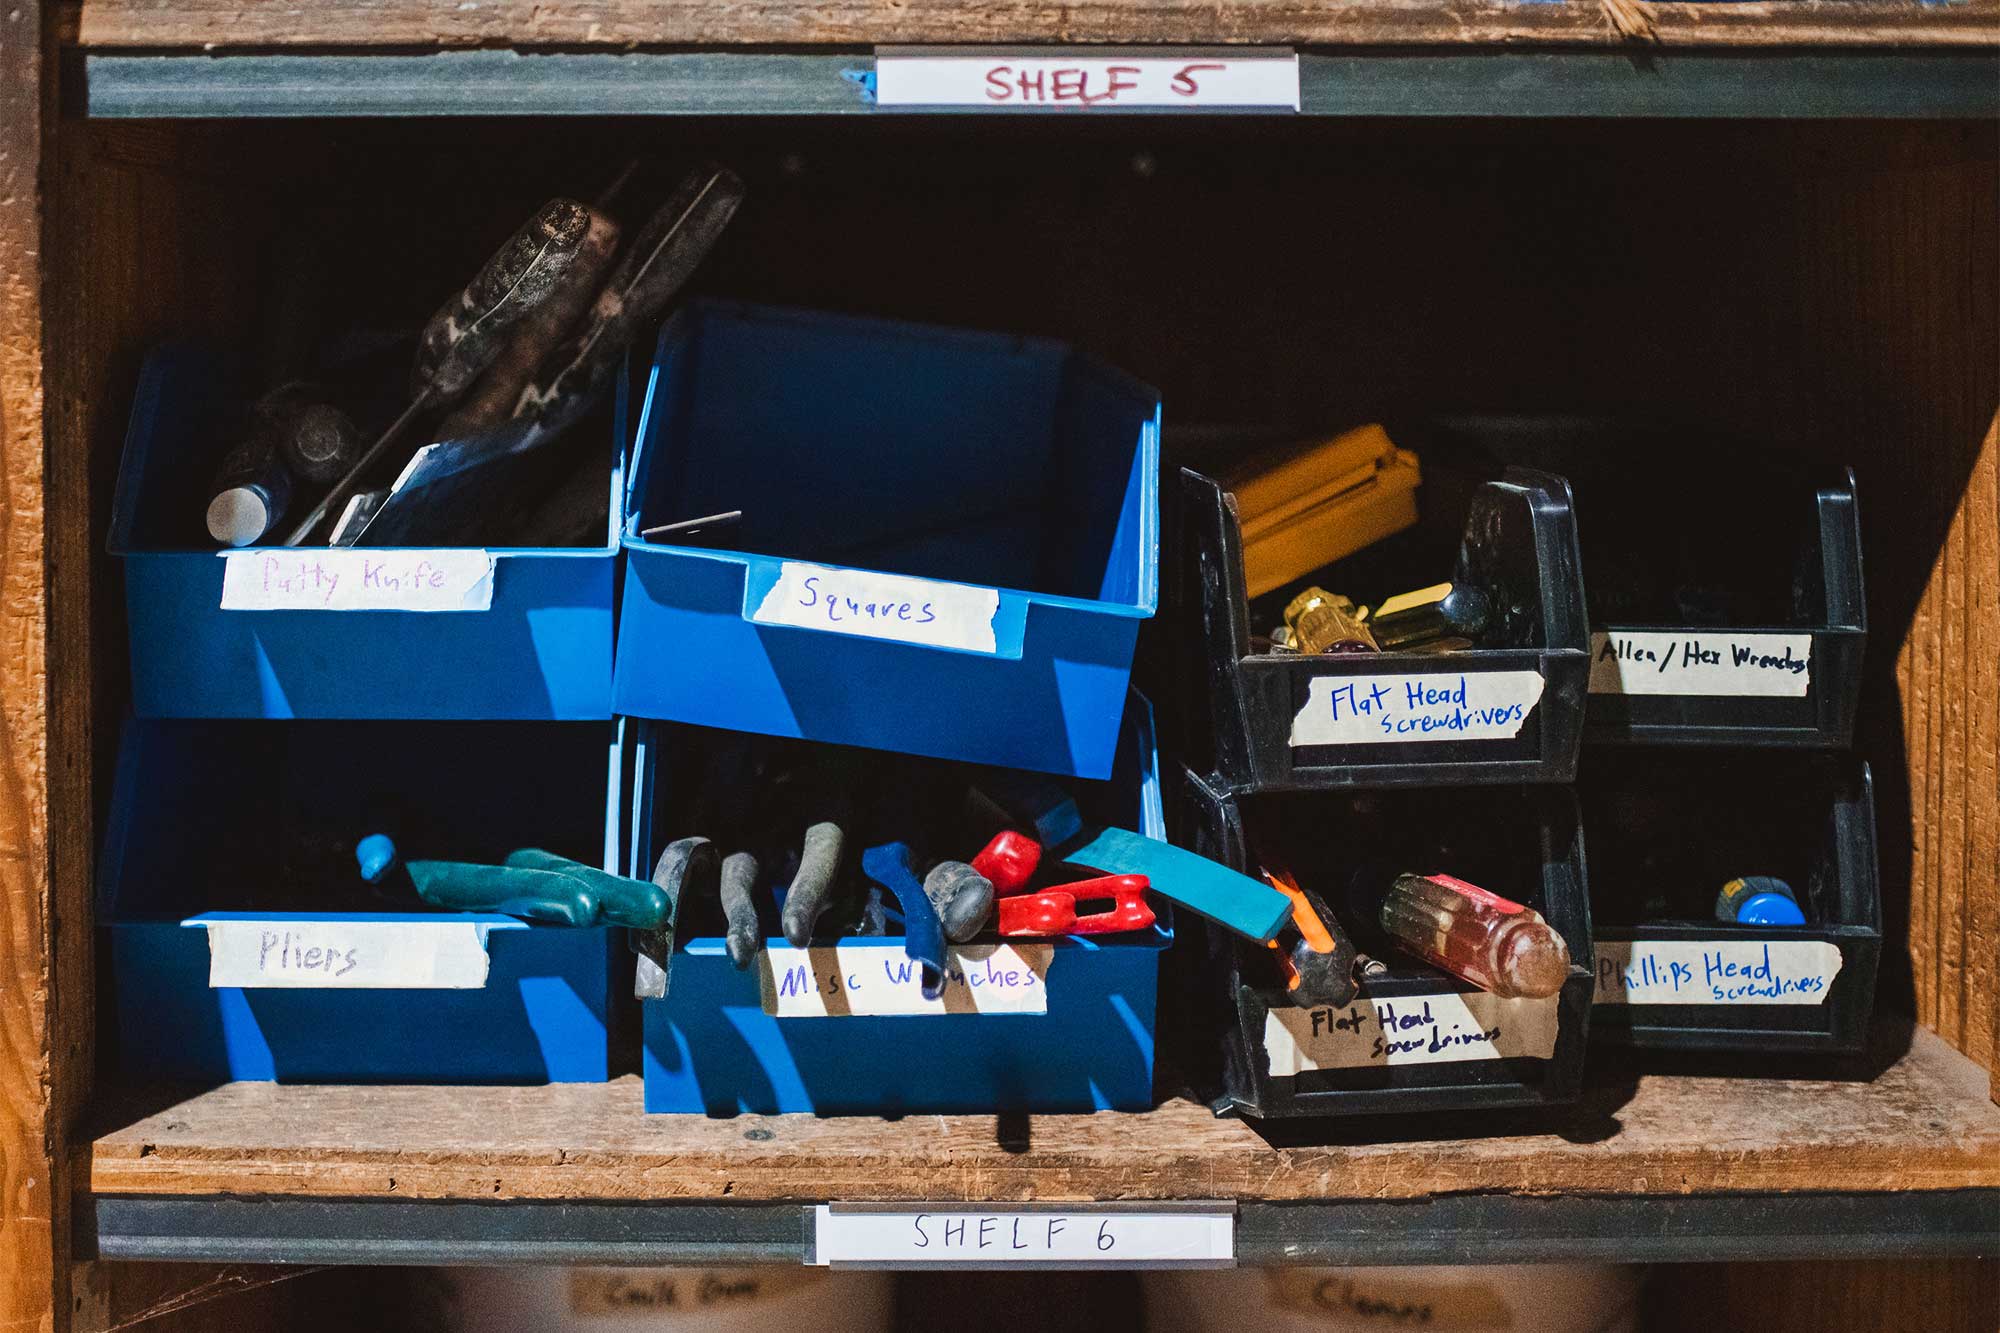 Tools are catalogued and carefully stored on wooden shelves at the Charlottesville Tool Library. (Photos by Fang Yi)